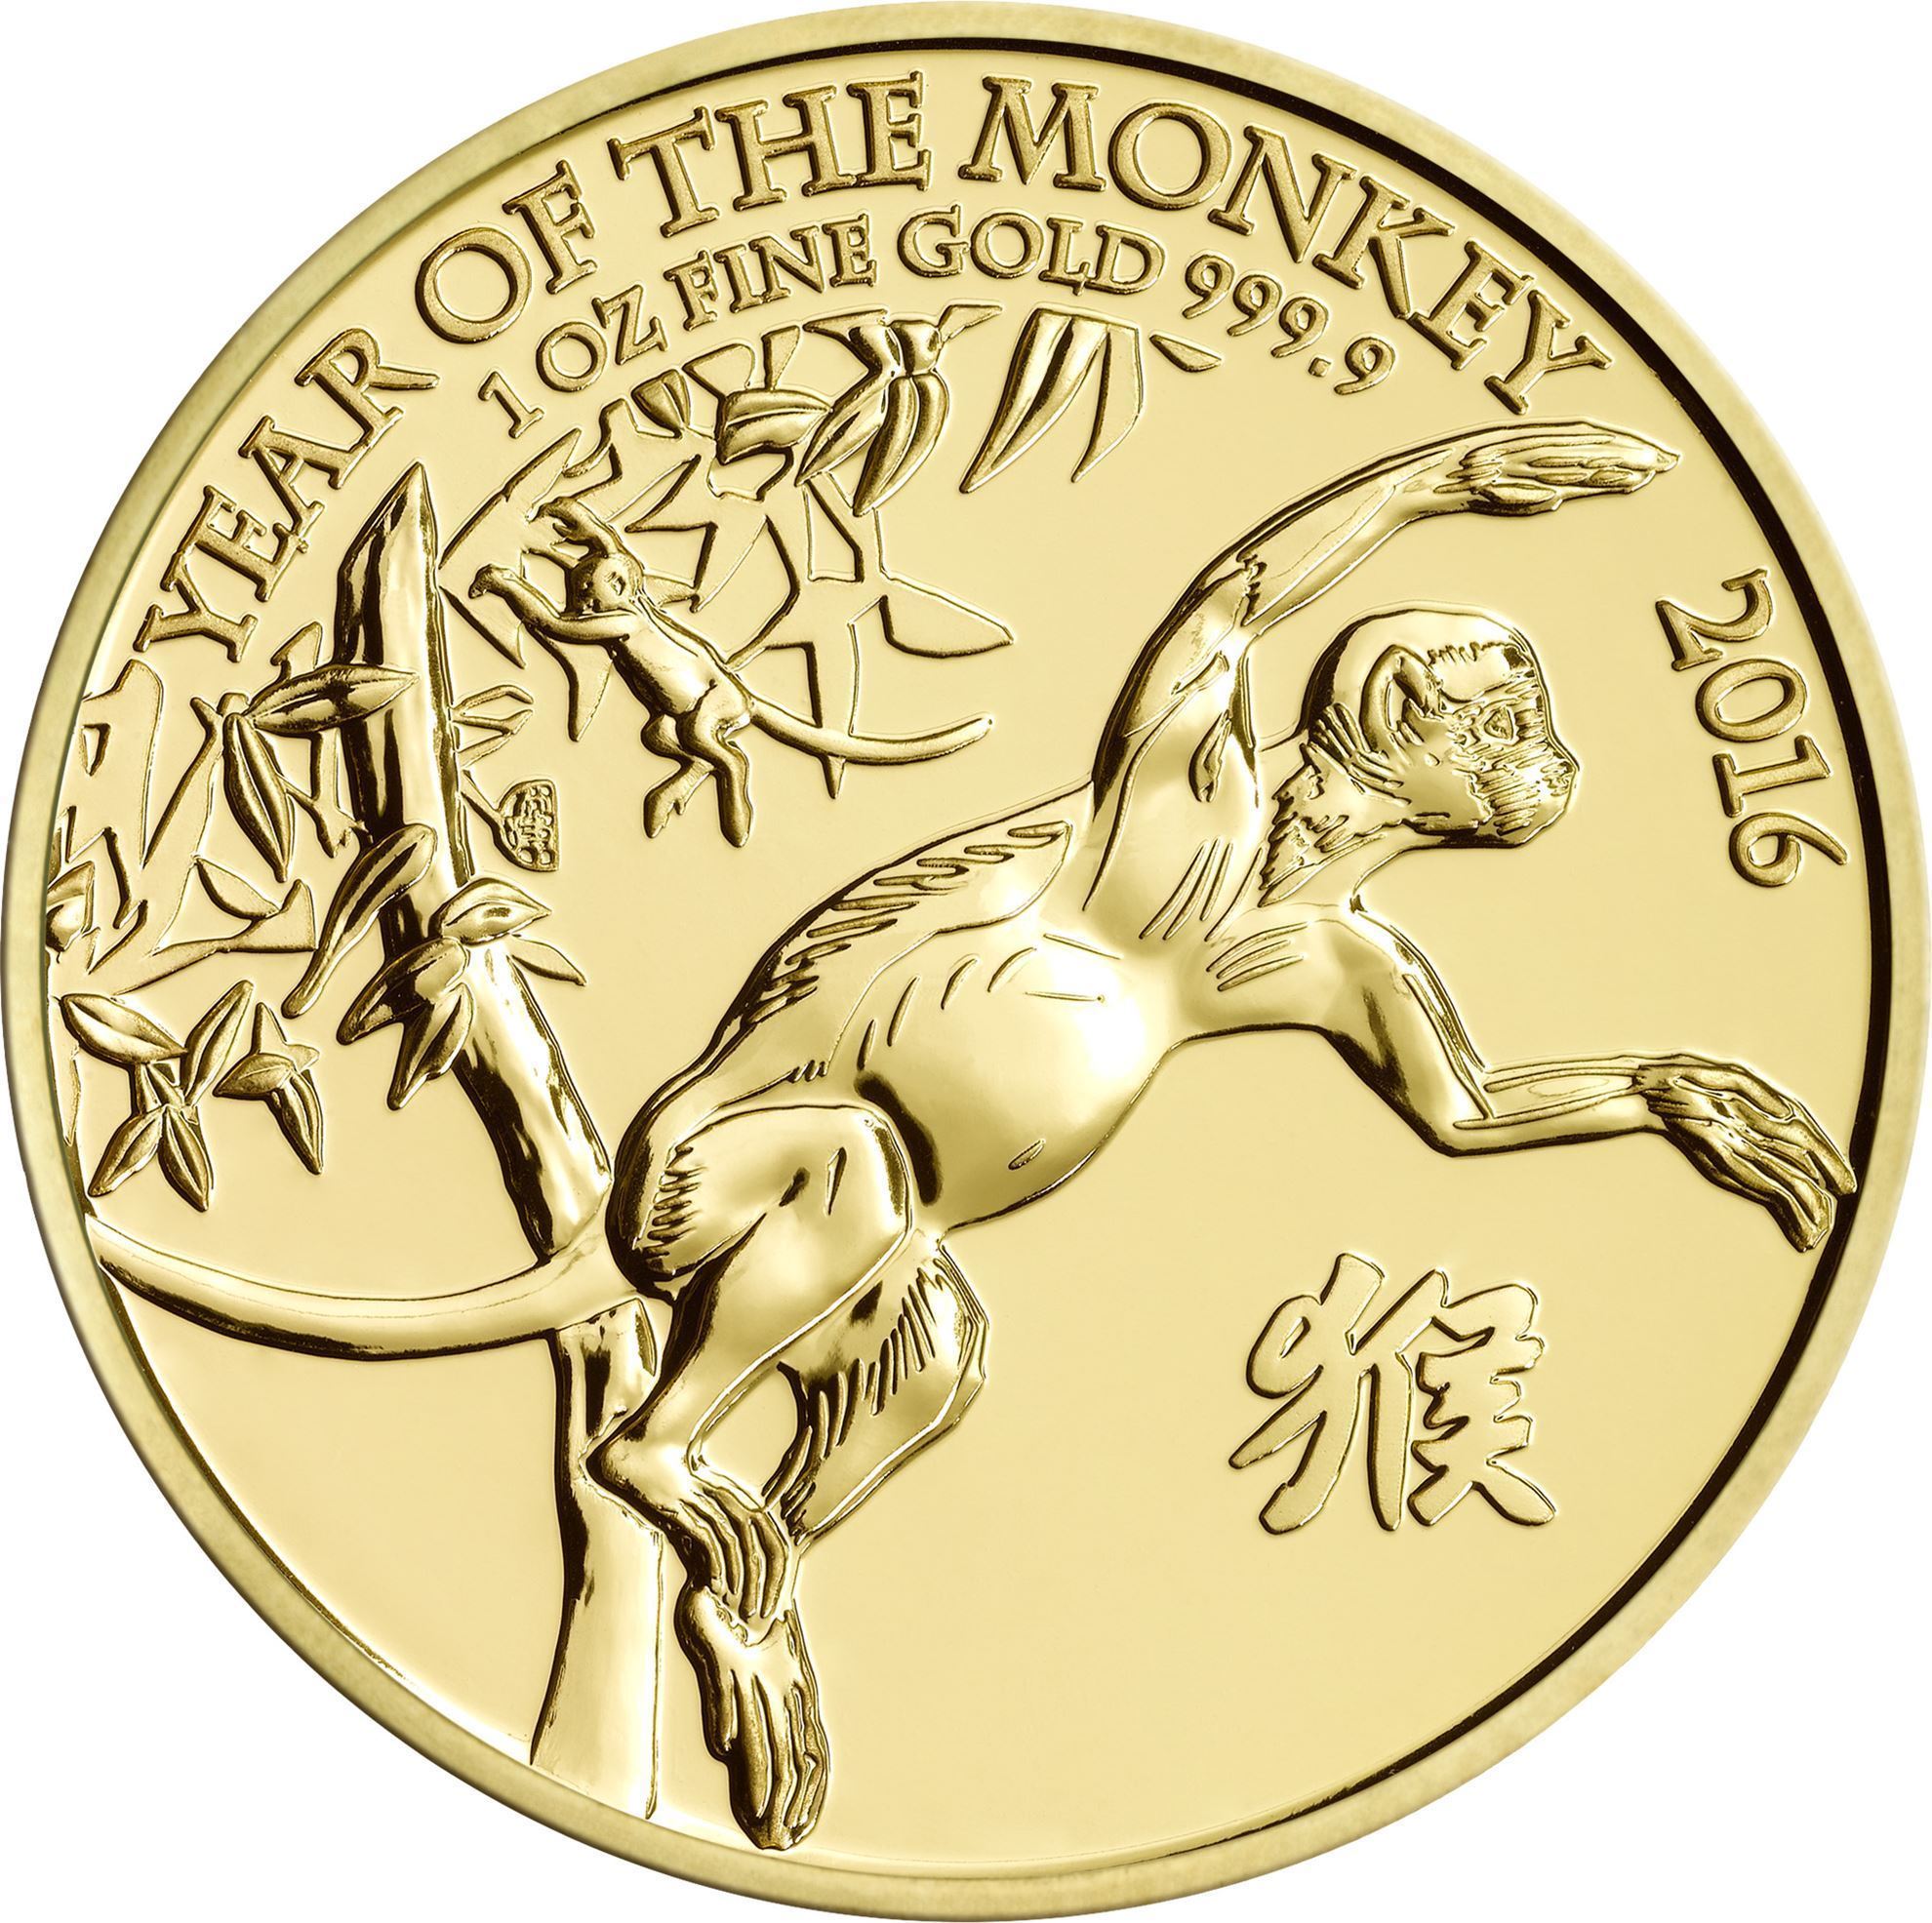 2016 Year of the Monkey gold coin 1